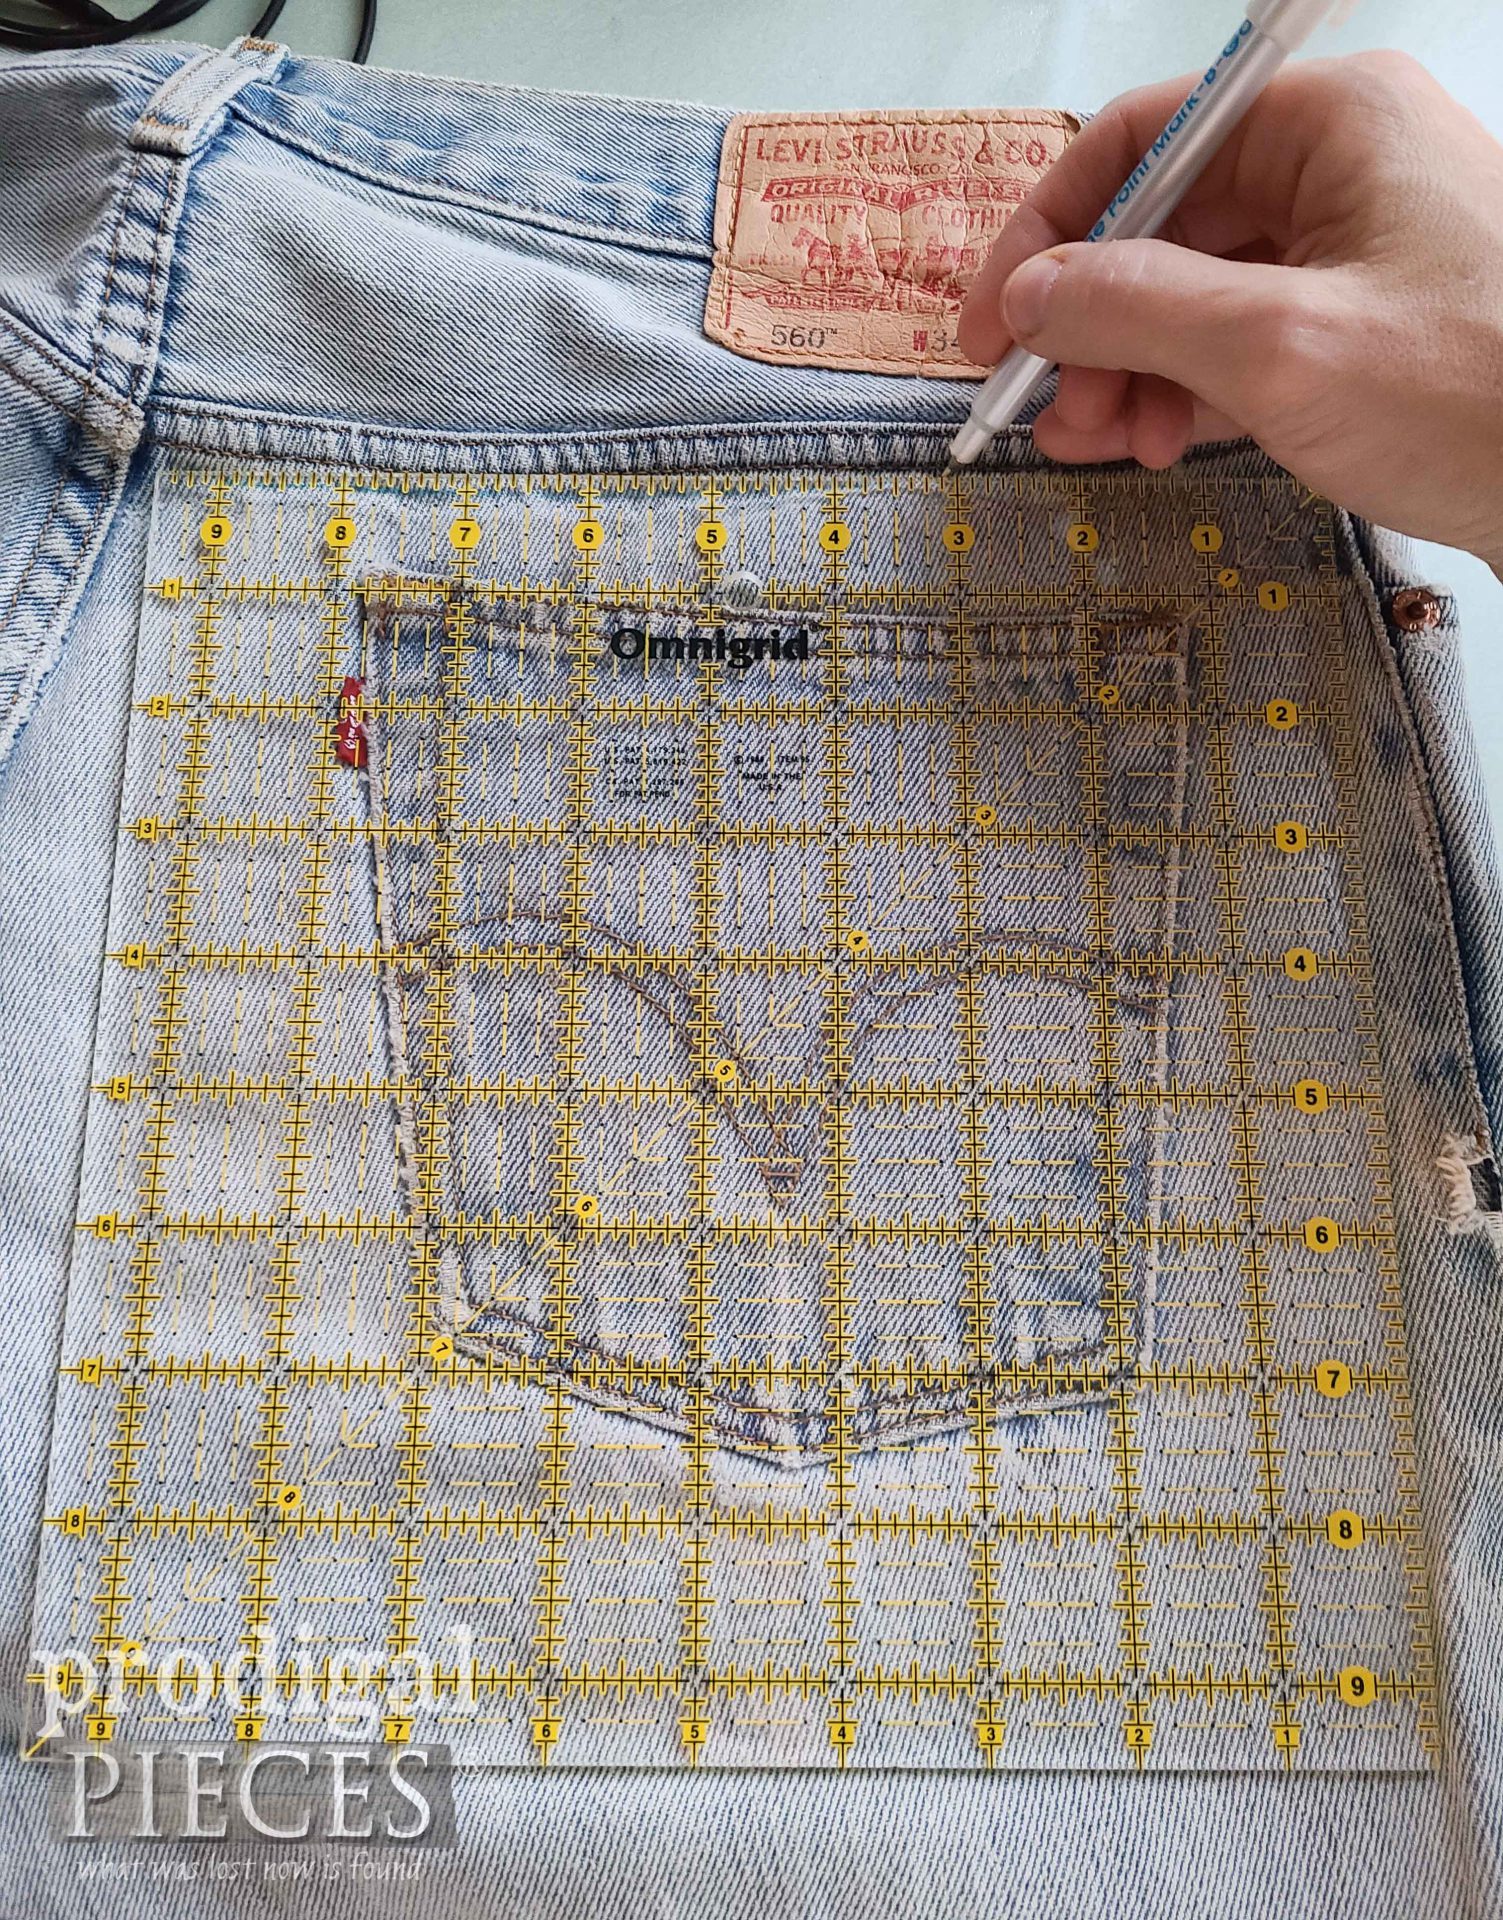 Tracing & Cutting Jean Pockets for Upcycled Jean Storage Buckets | prodigalpieces.com